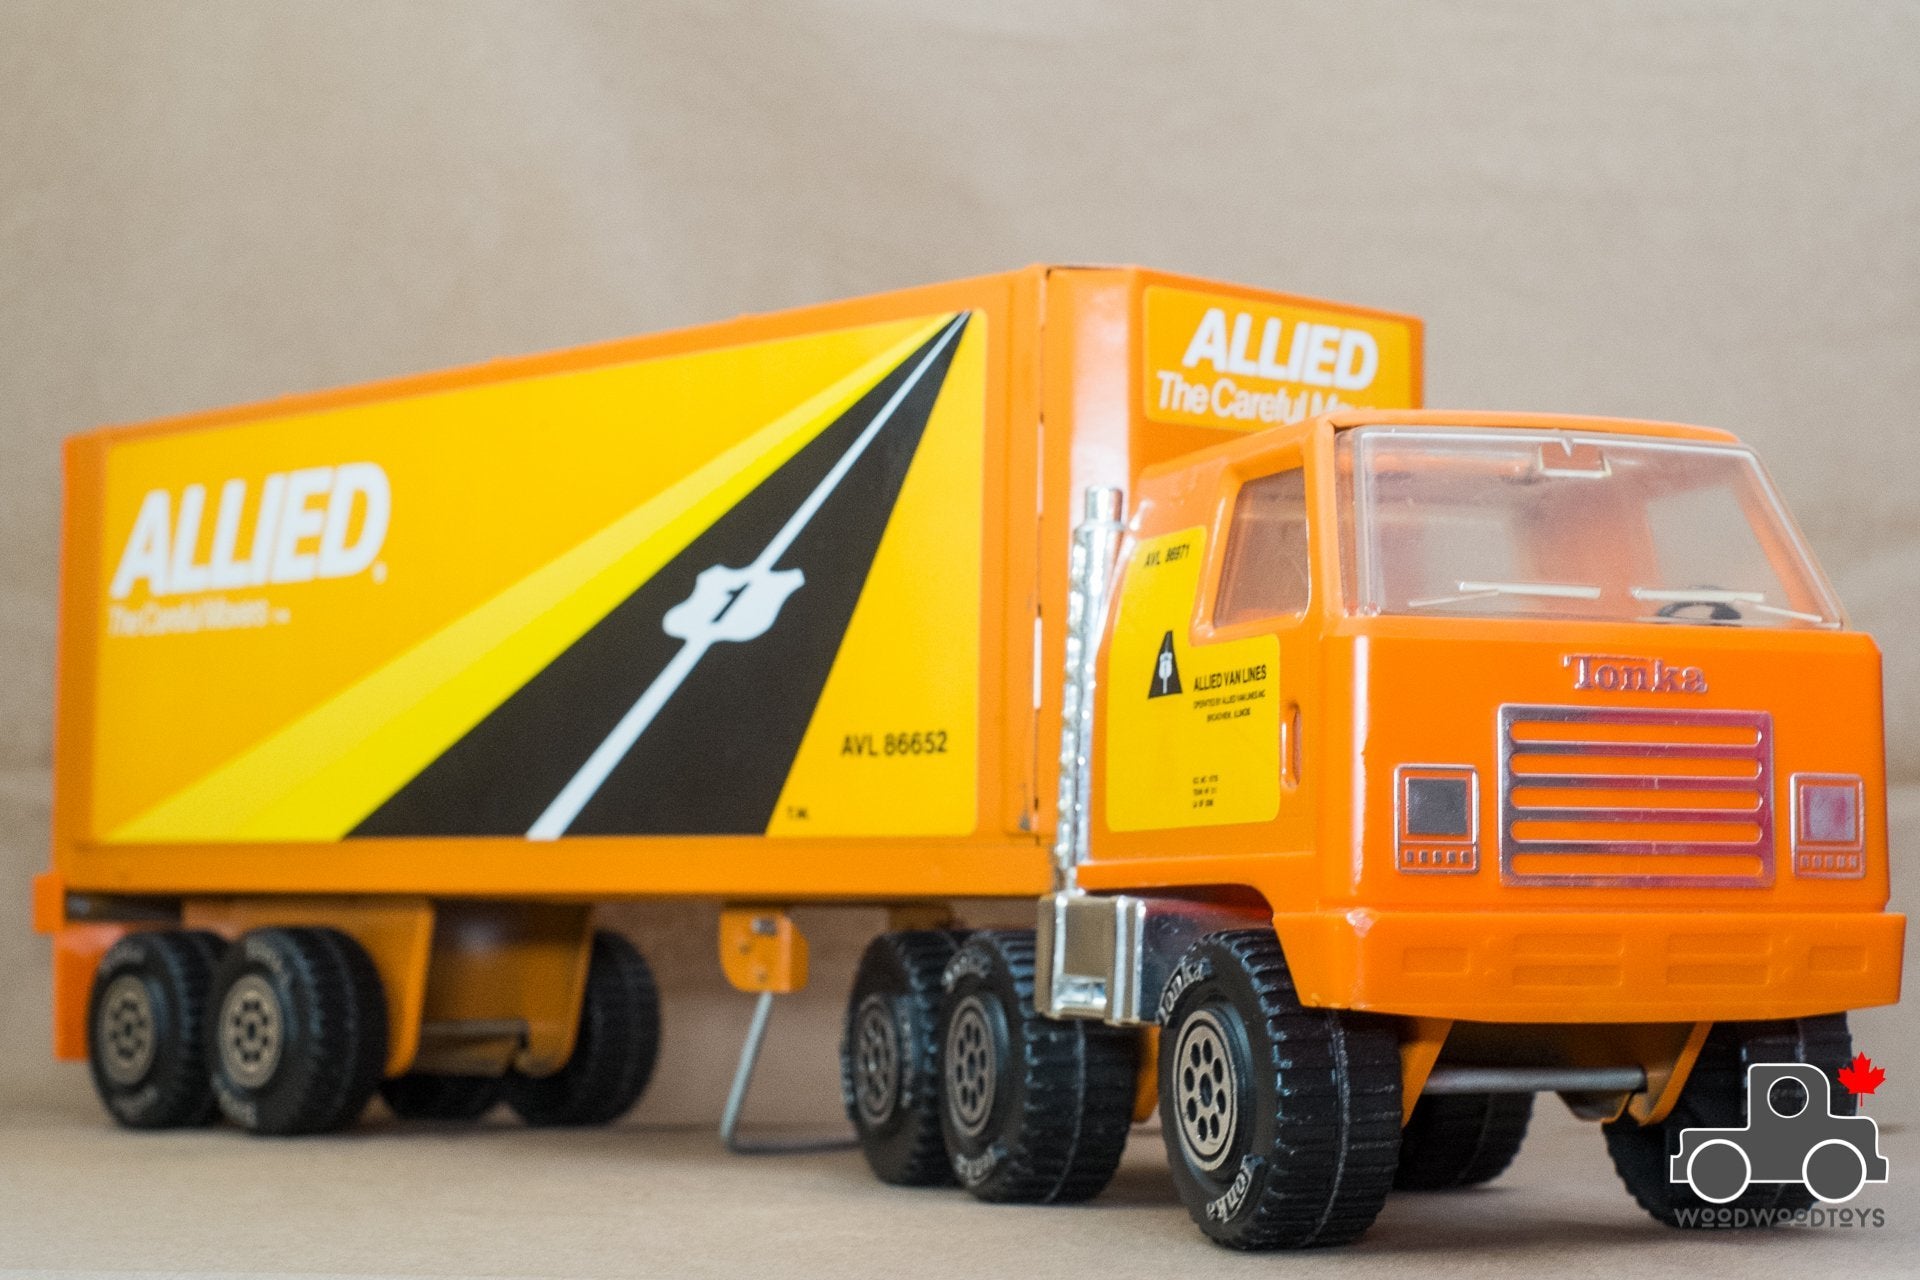 Vintage 1970s Tonka Steel Allied Moving Truck - Wood Wood Toys Canada's Favourite Montessori Toy Store